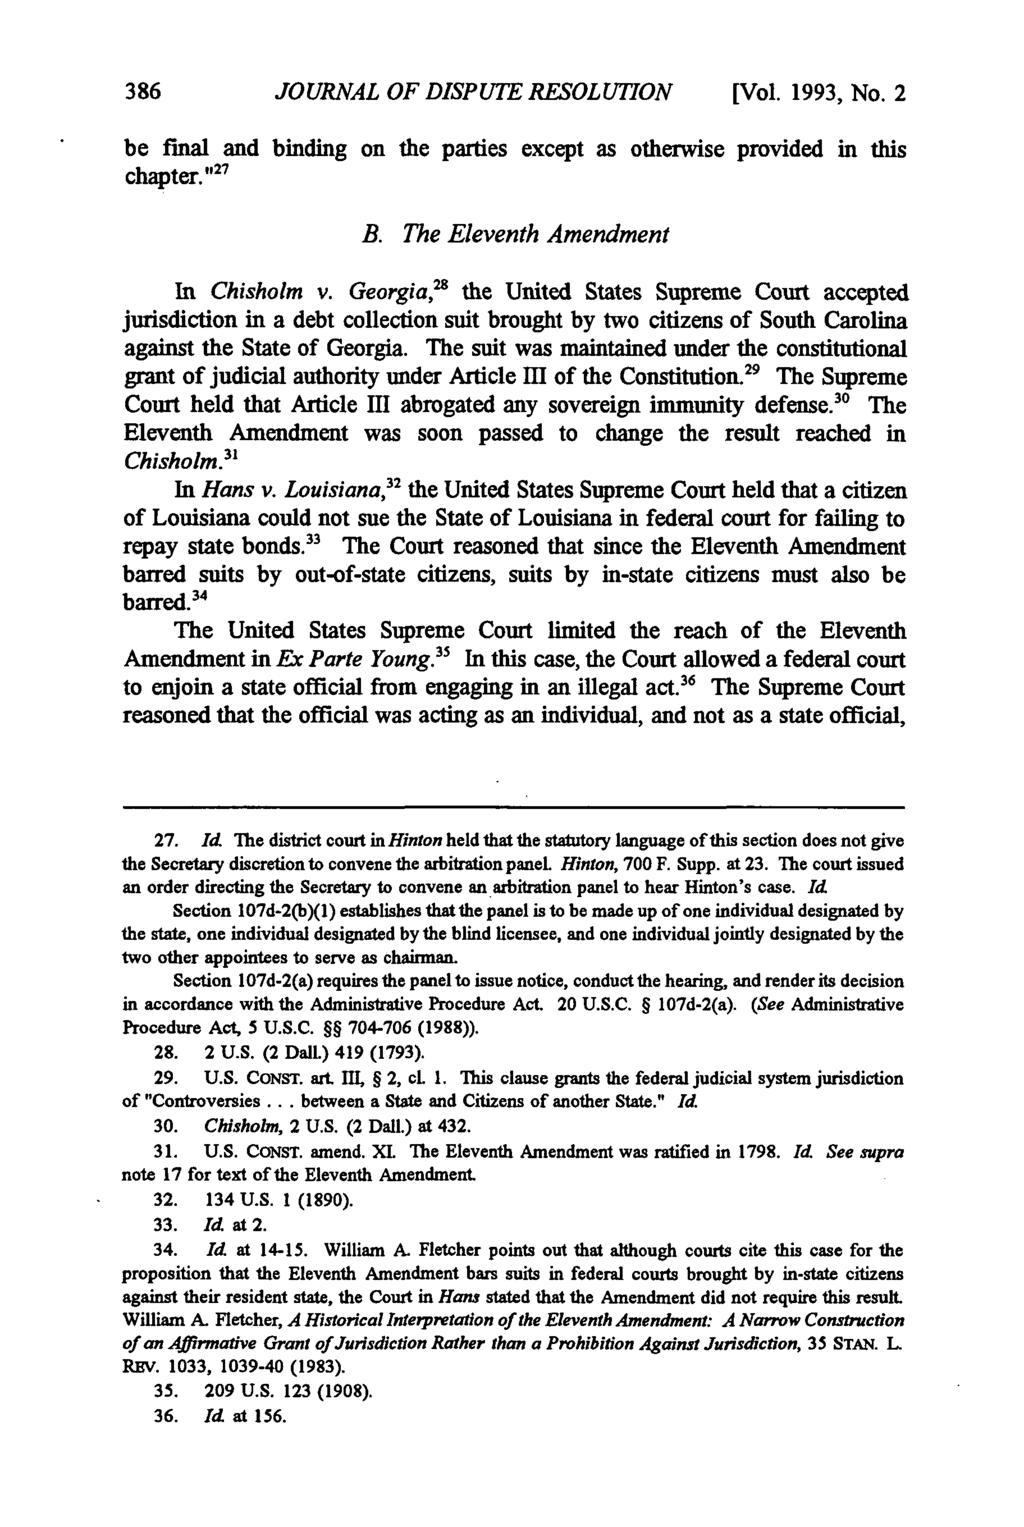 Journal of Dispute Resolution, Vol. 1993, Iss. 2 [1993], Art. 9 JOURNAL OF DISPUTE RESOLUTION be final and binding on the parties except as otherwise provided in this chapter." 27 B.